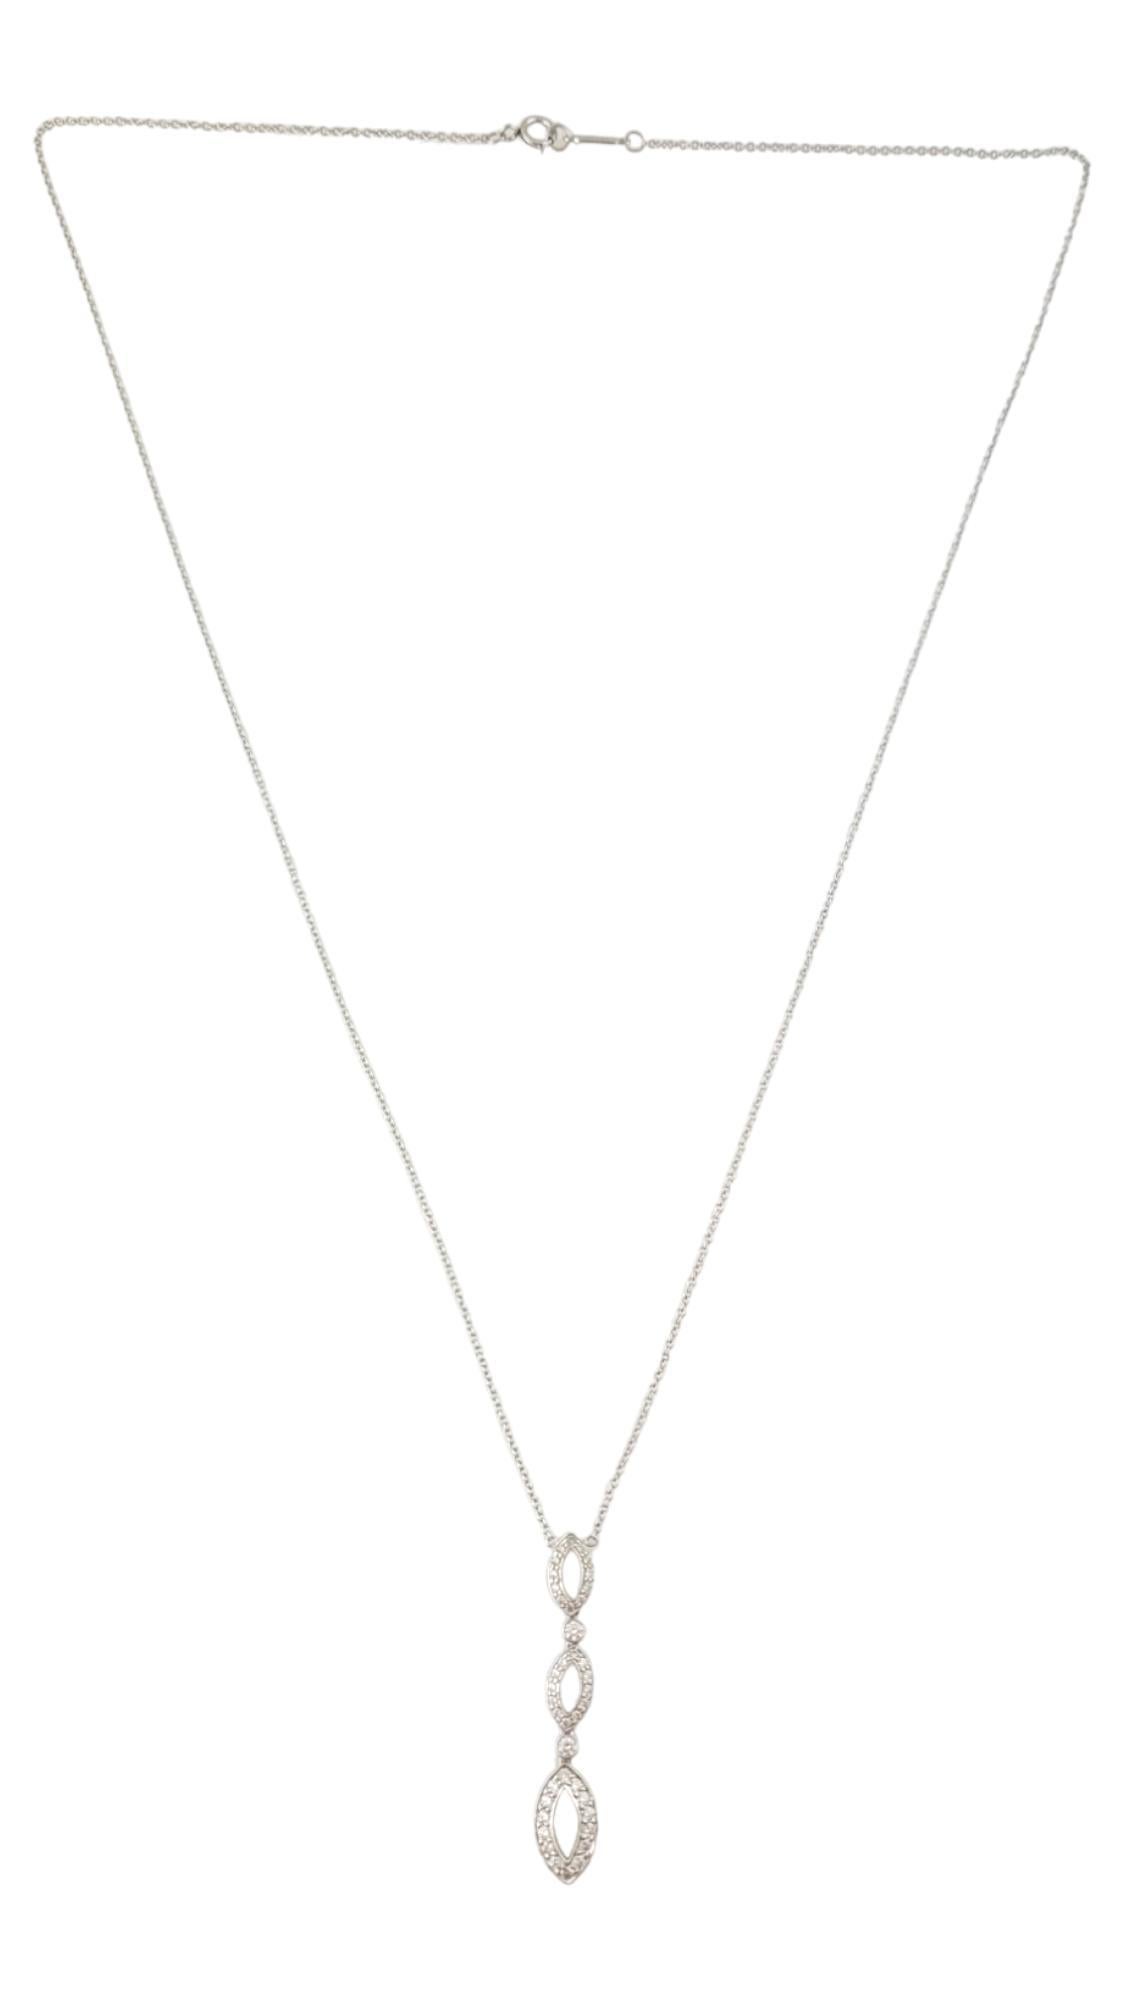 Tiffany & Co. Platinum Diamond Swing Drop Necklace

This beautiful Tiffany & Co. drop necklace is set in platinum and is a retired piece from the Tiffany Swing collection.

3 flexible drop stations are set with approx. .56cts of diamonds

Diamonds